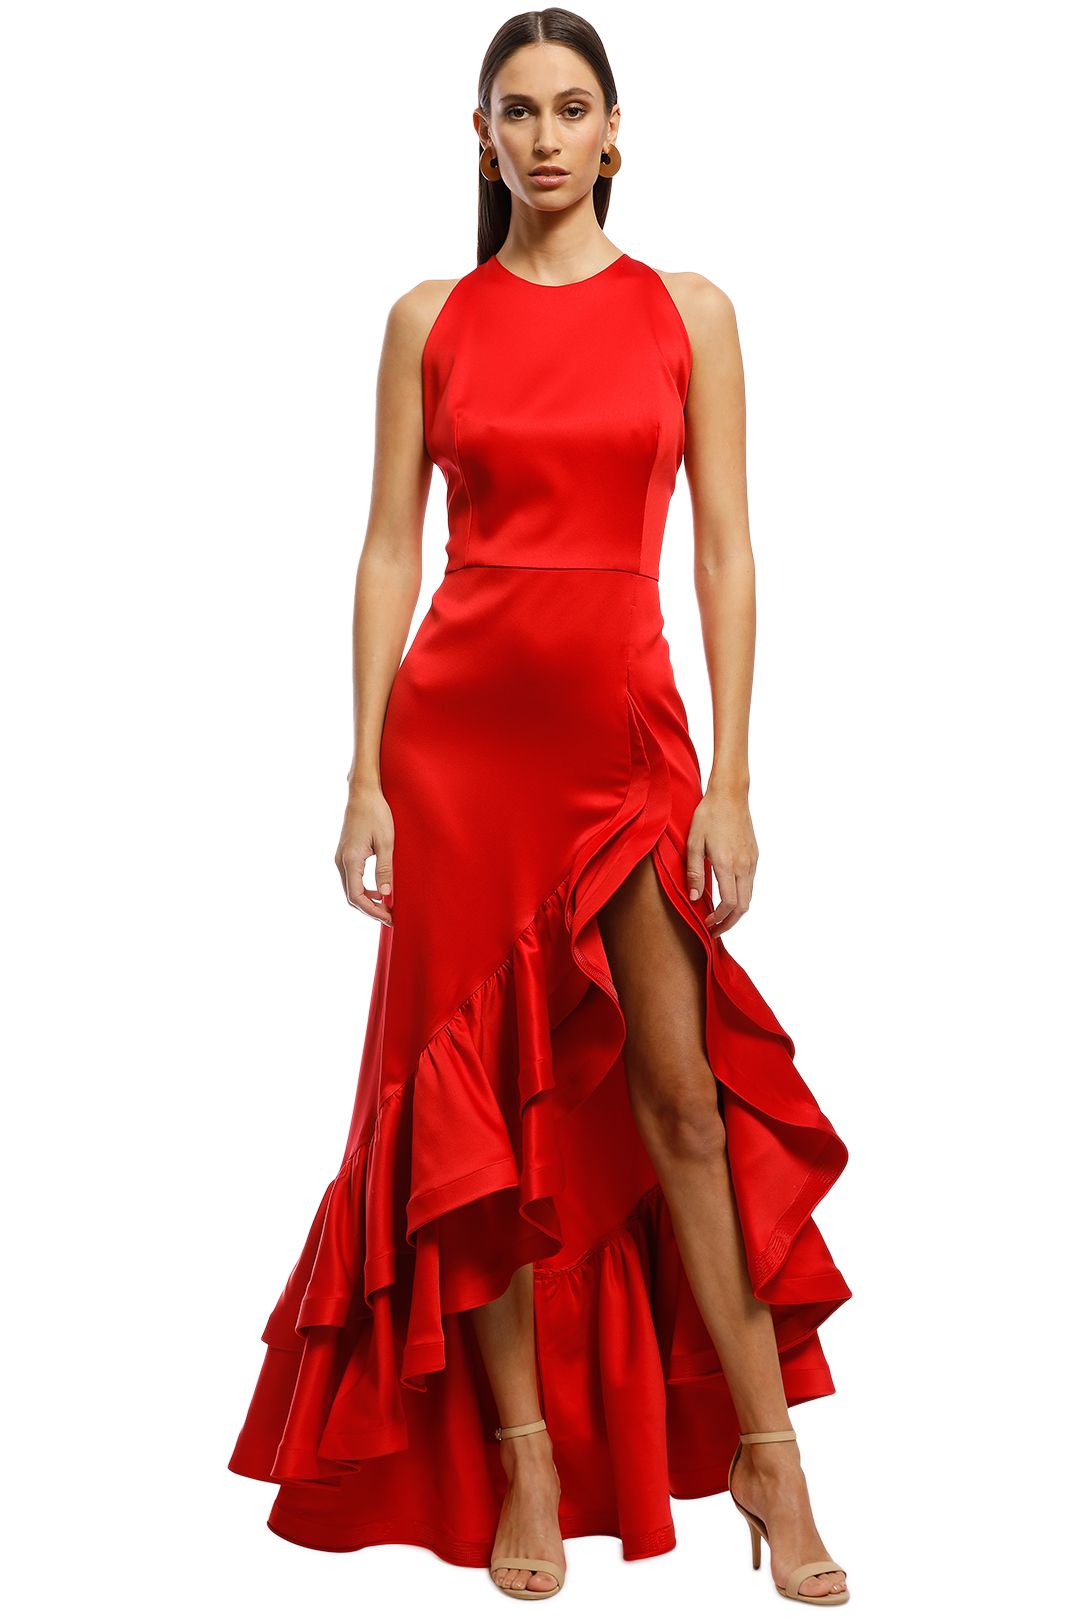 Frida flame dress - Red by Bronx and Banco for Hire